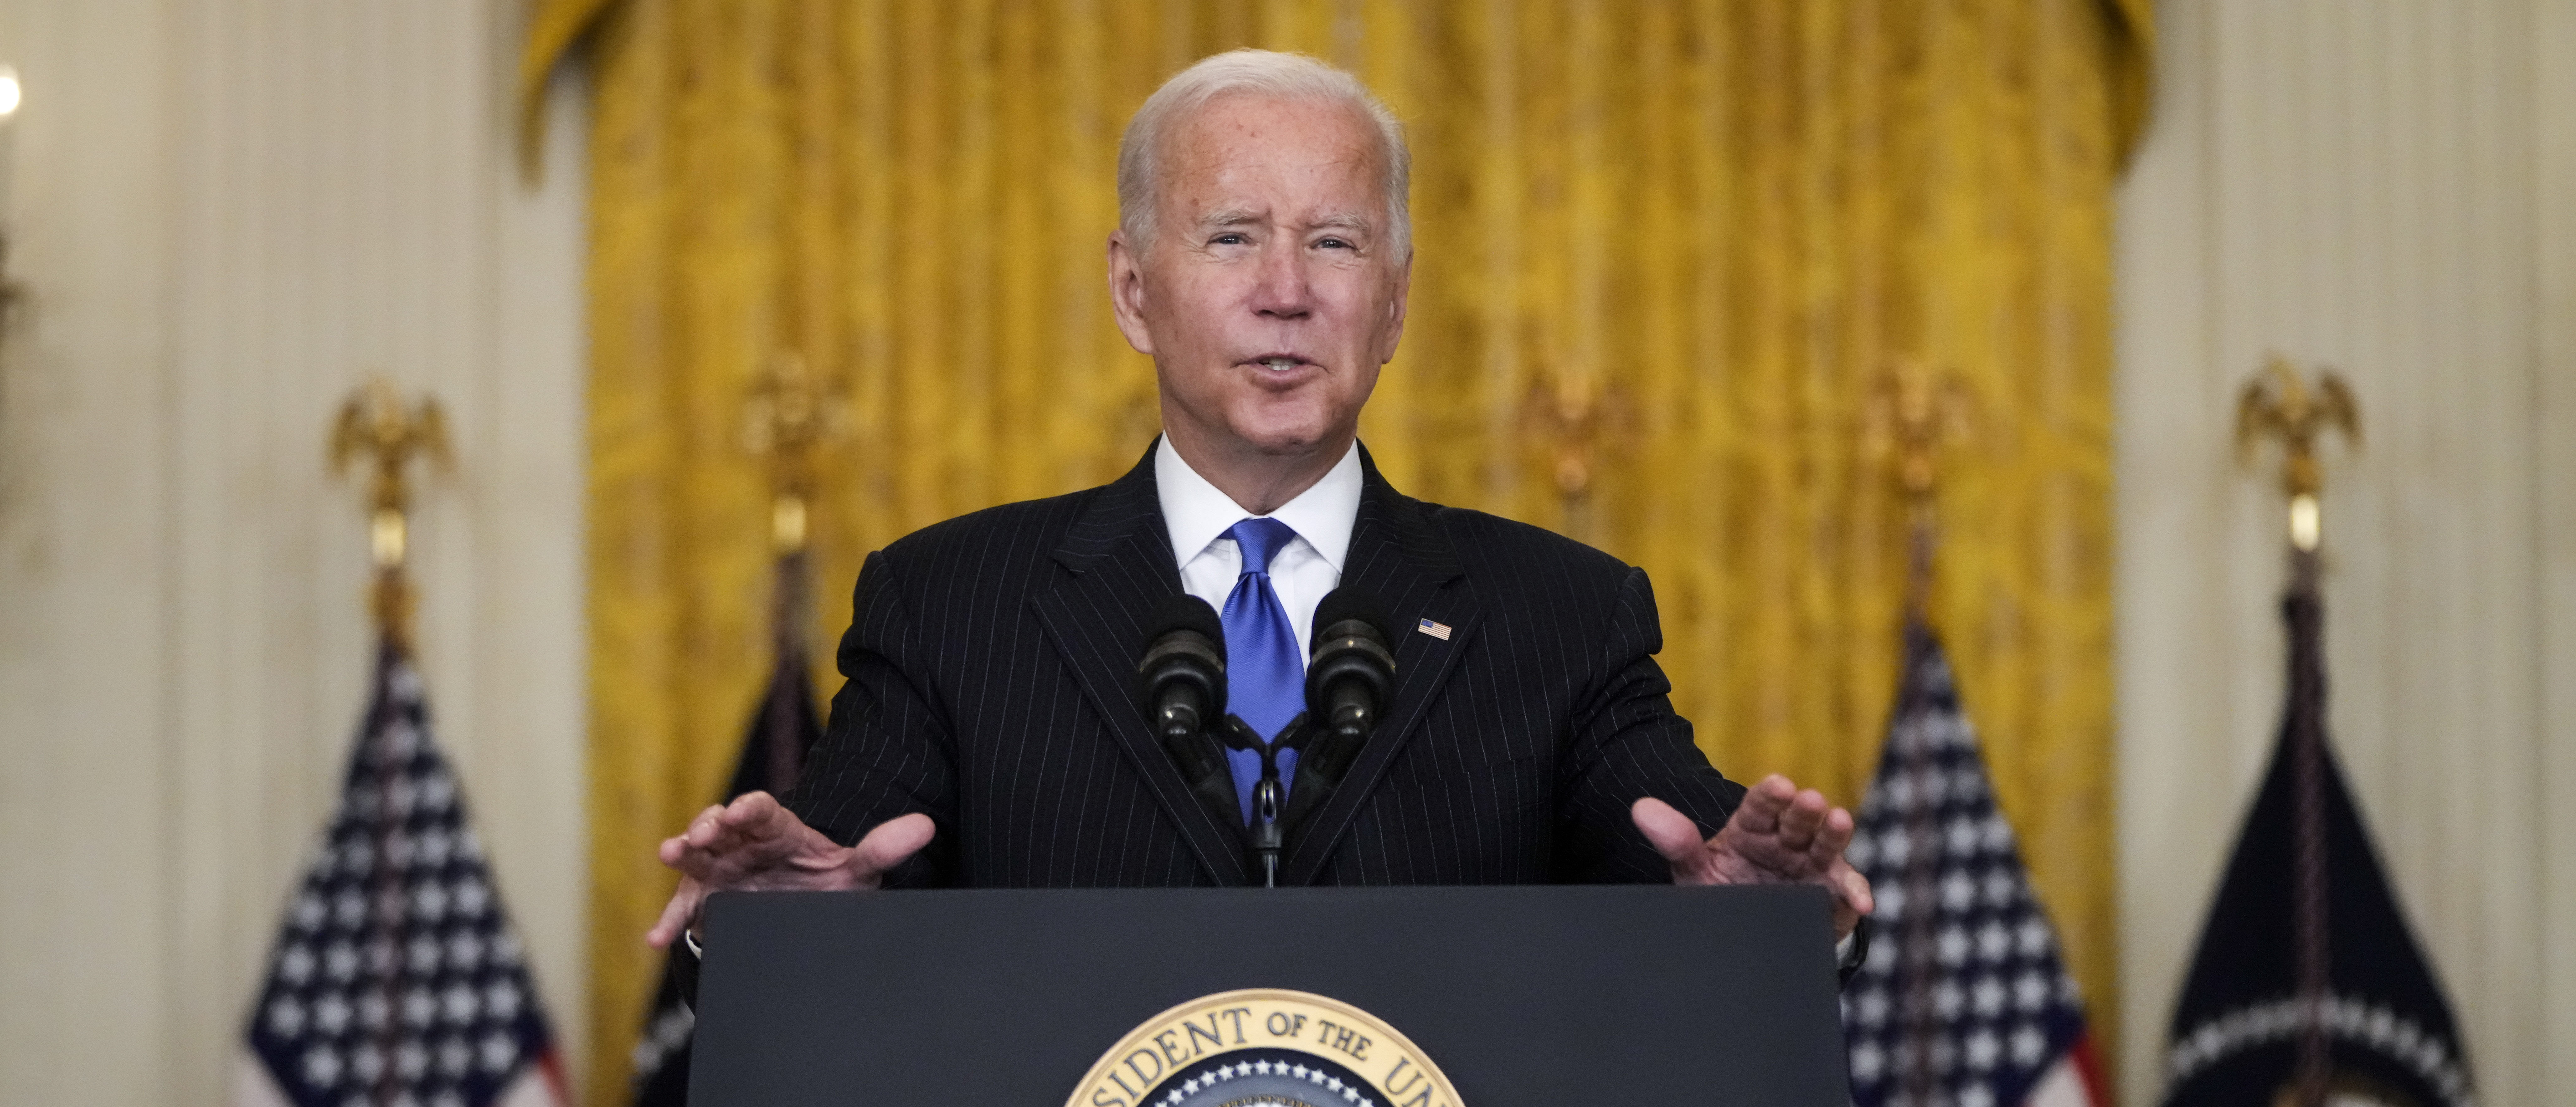 Biden Begs Oil Industry To Lower Prices As Energy Crisis Looms: REPORT